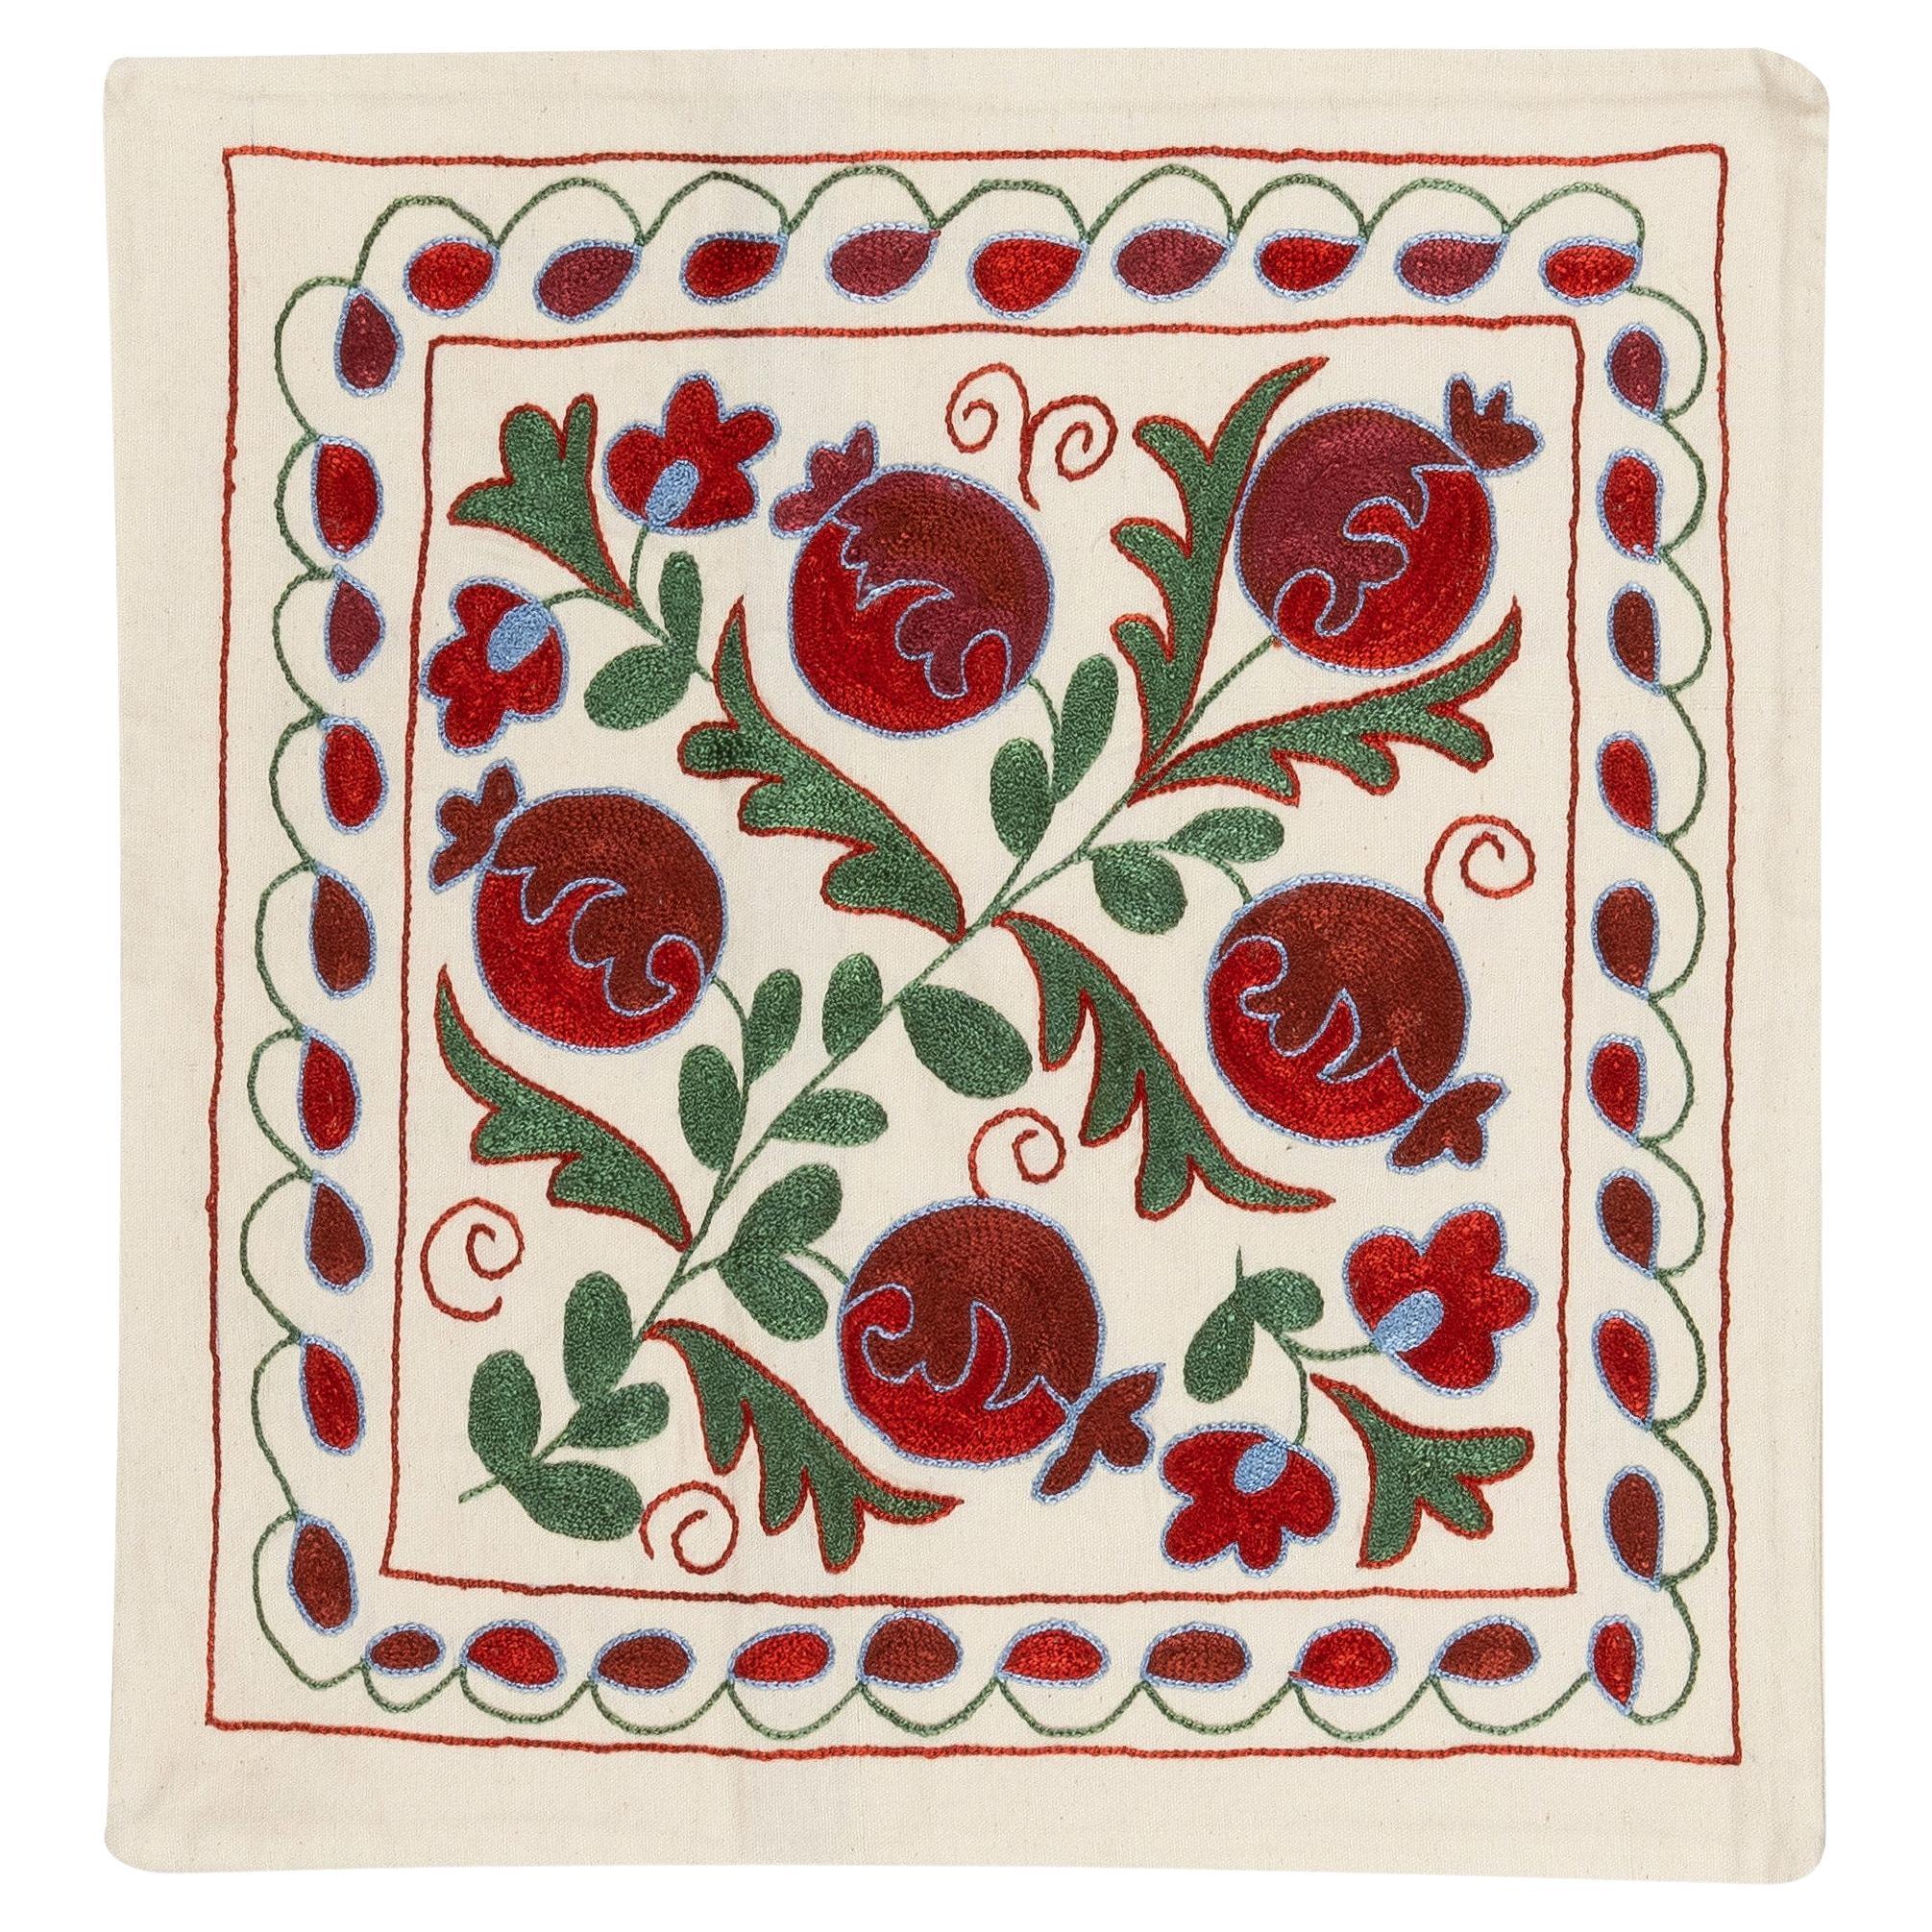 19"x19" Decorative Silk Embroidered Suzani Cushion Cover in Cream, Red and Green